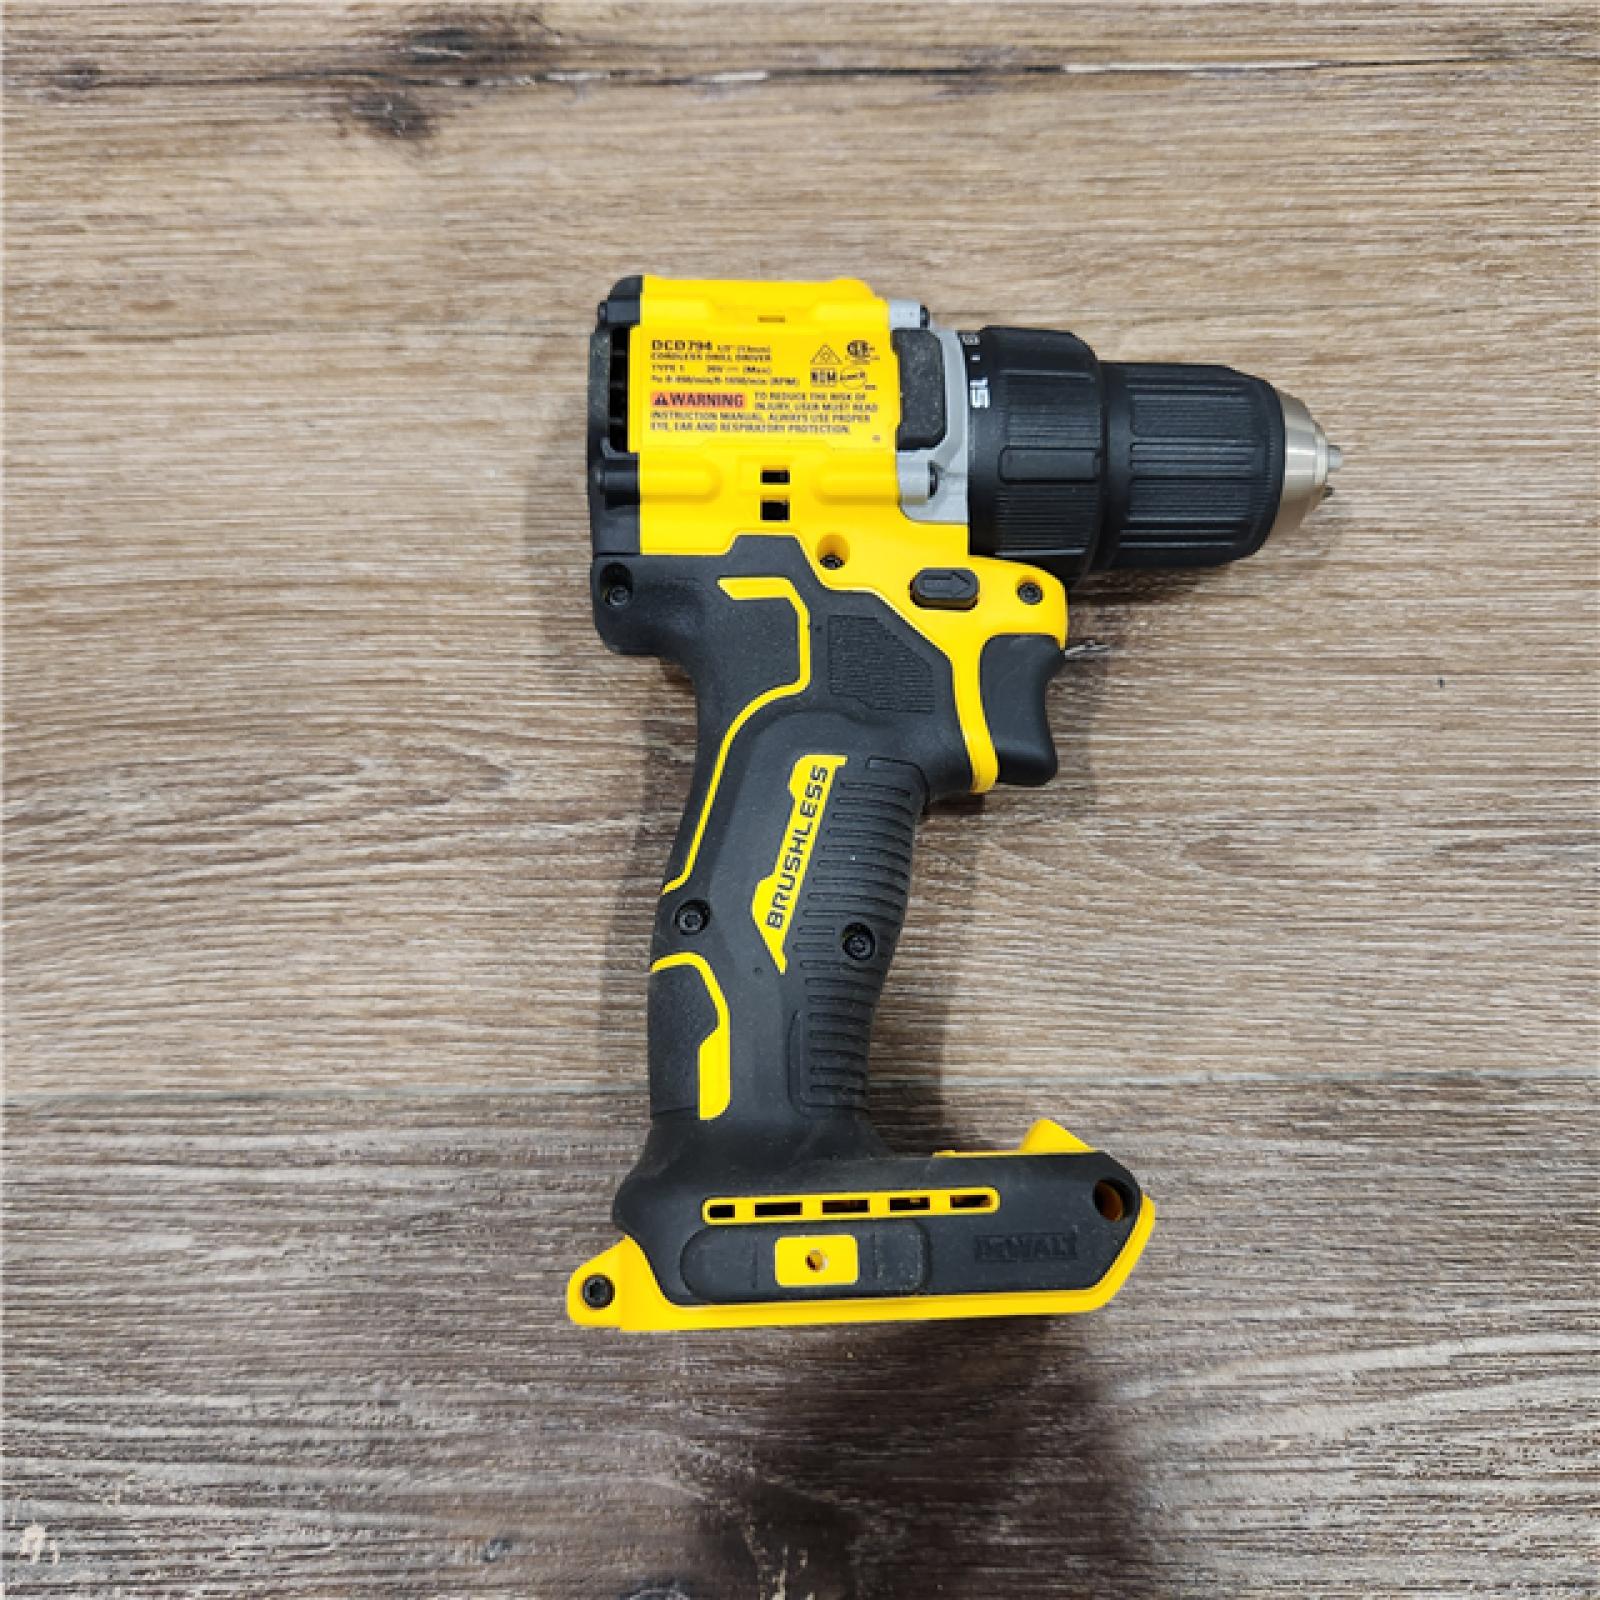 DeWalt 20V MAX ATOMIC 20 V 1/2 in. Brushless Cordless Compact Drill ( Charger) NOT INCLUDED BATTERY